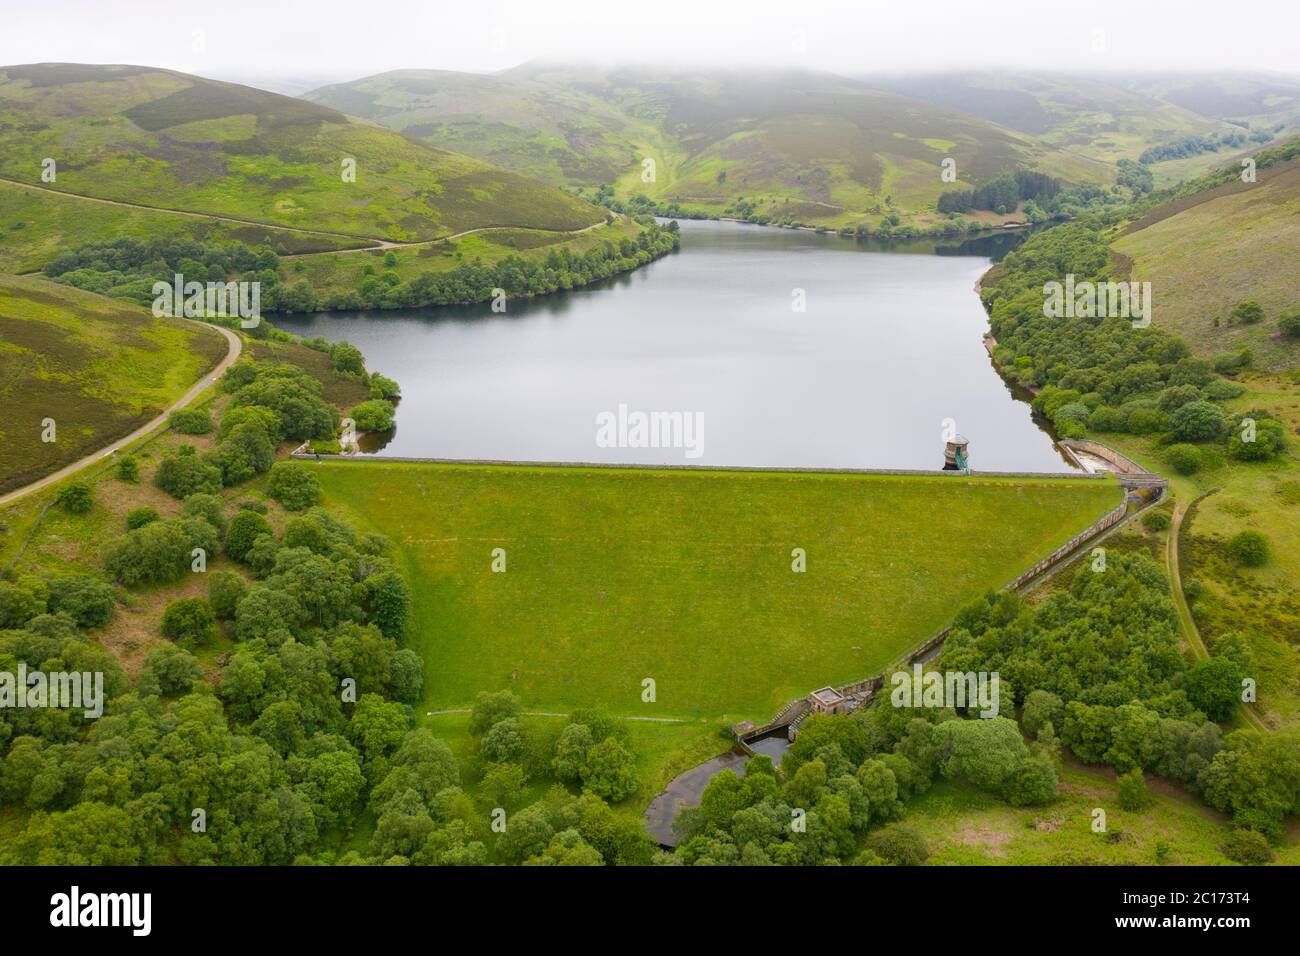 Aerial view of Hopes reservoir in East Lothian. Scotland, UK. Stock Photo